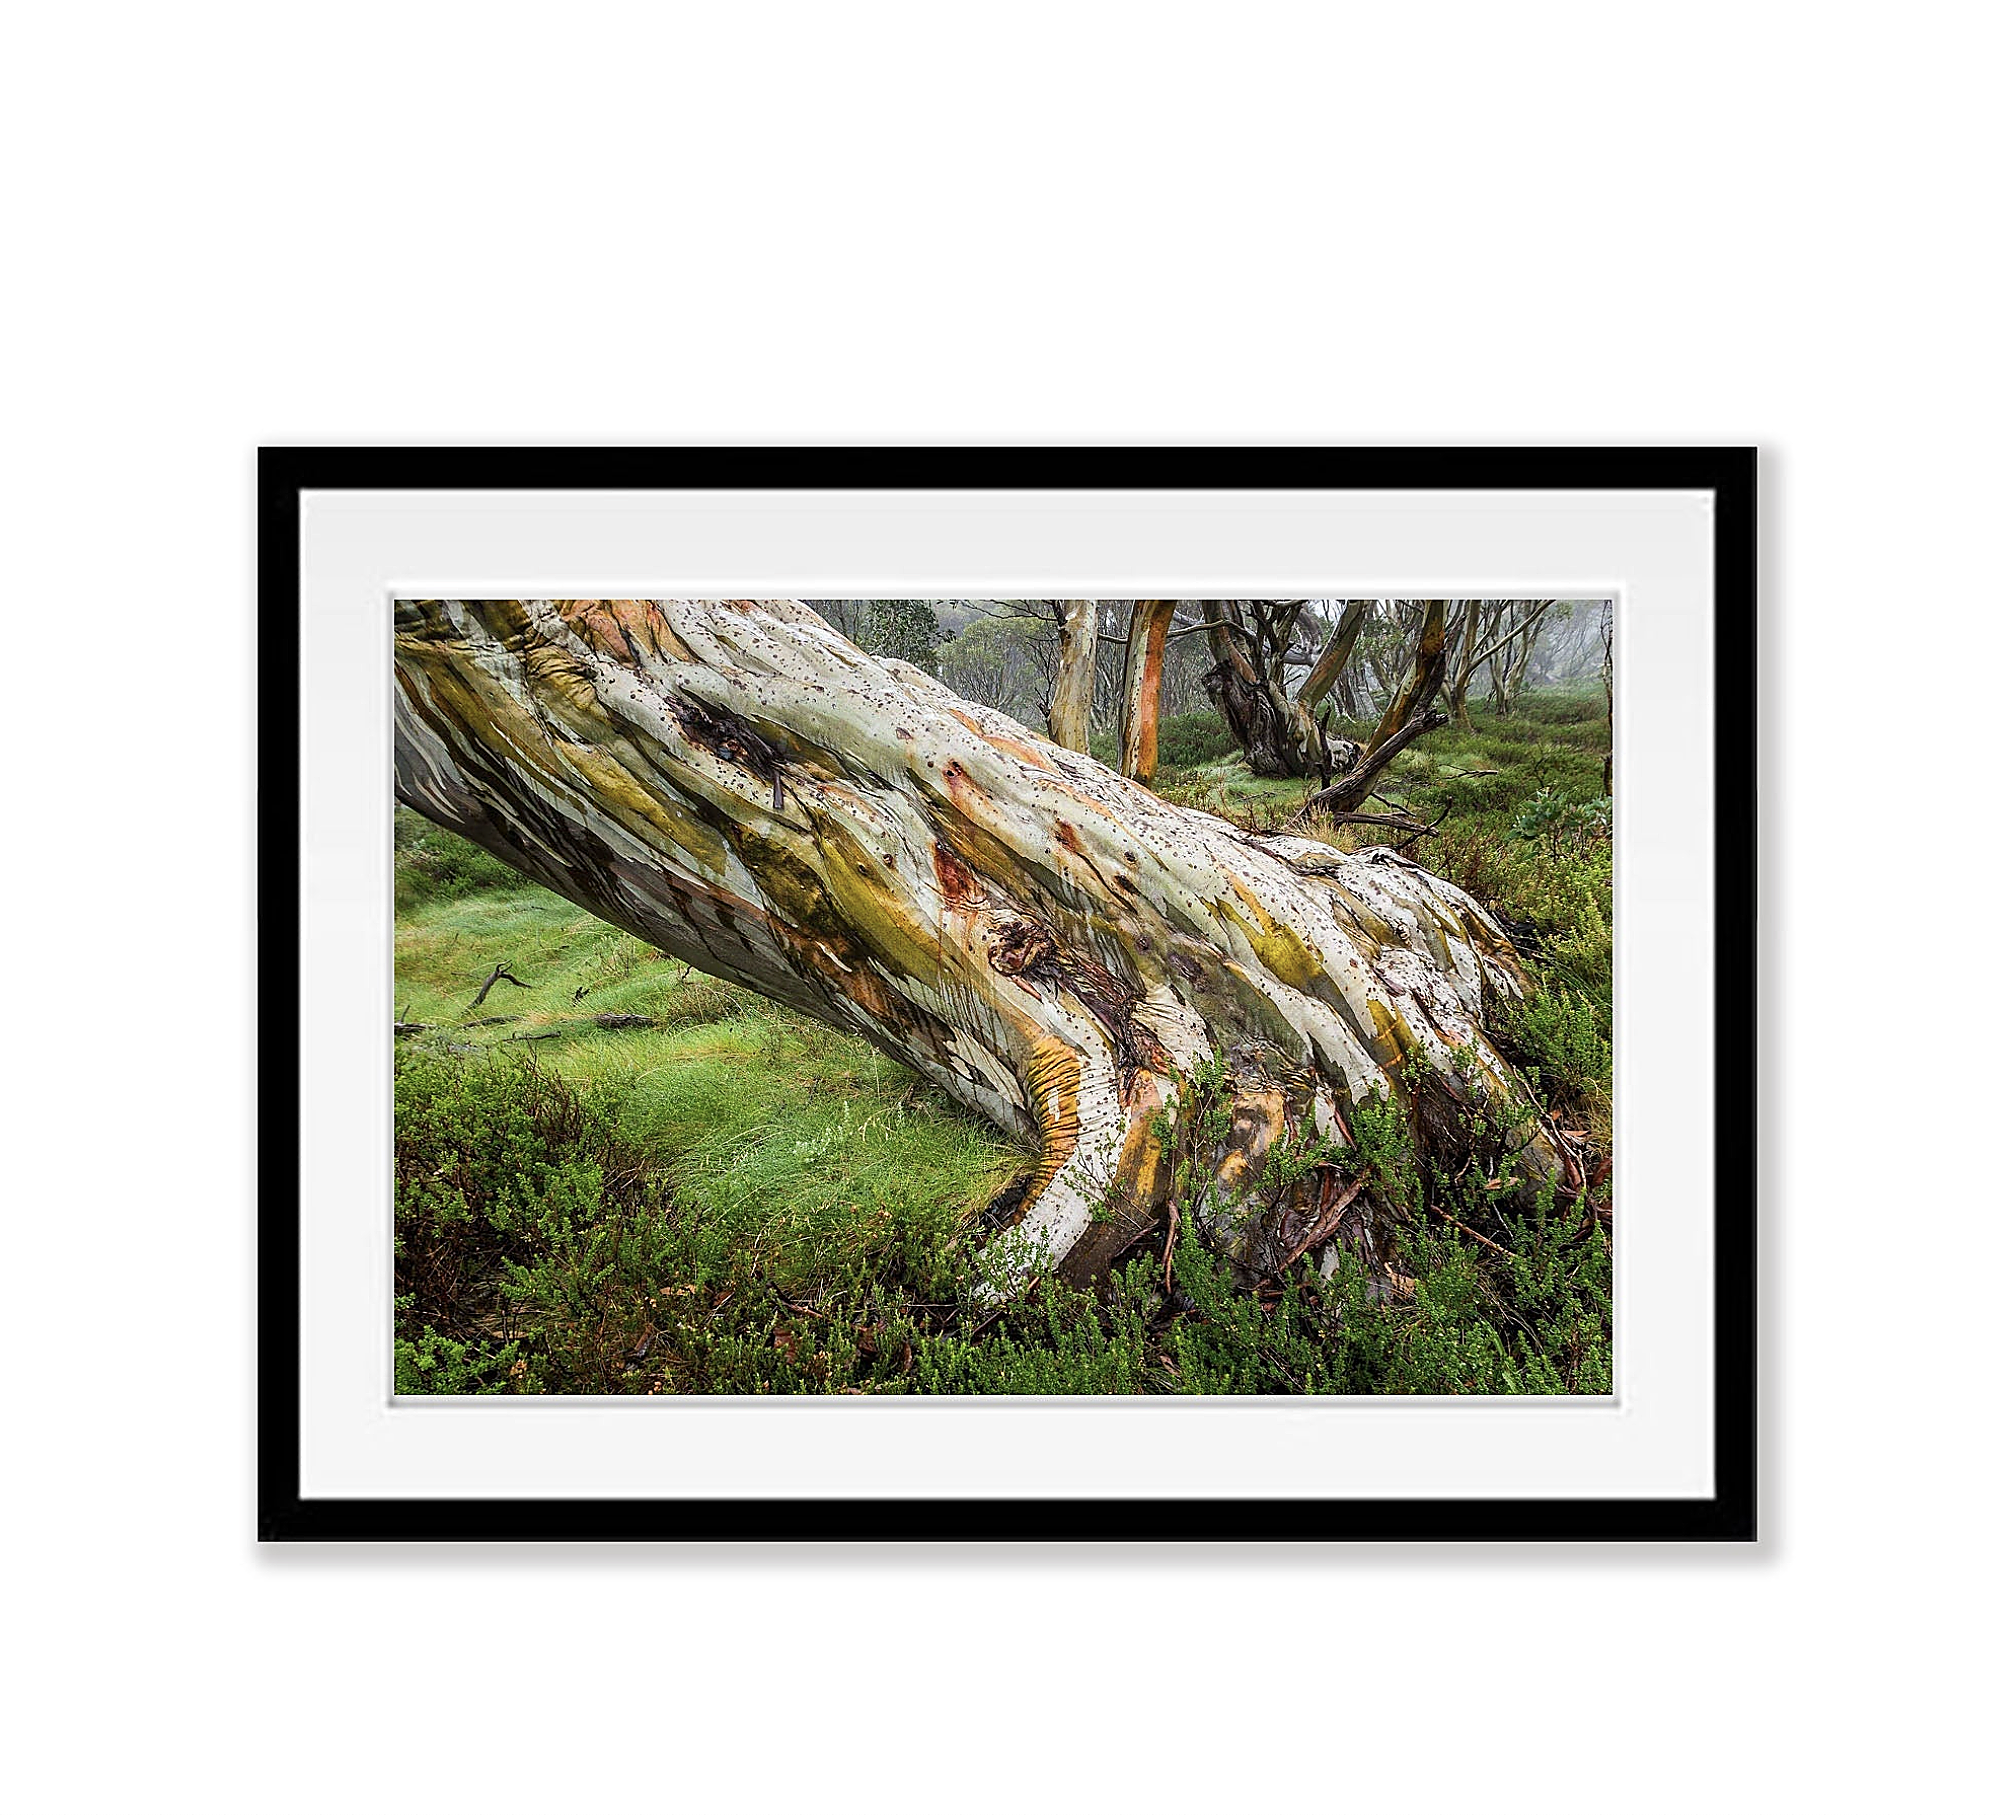 Ancient Snow Gum, Snowy Mountains, NSW